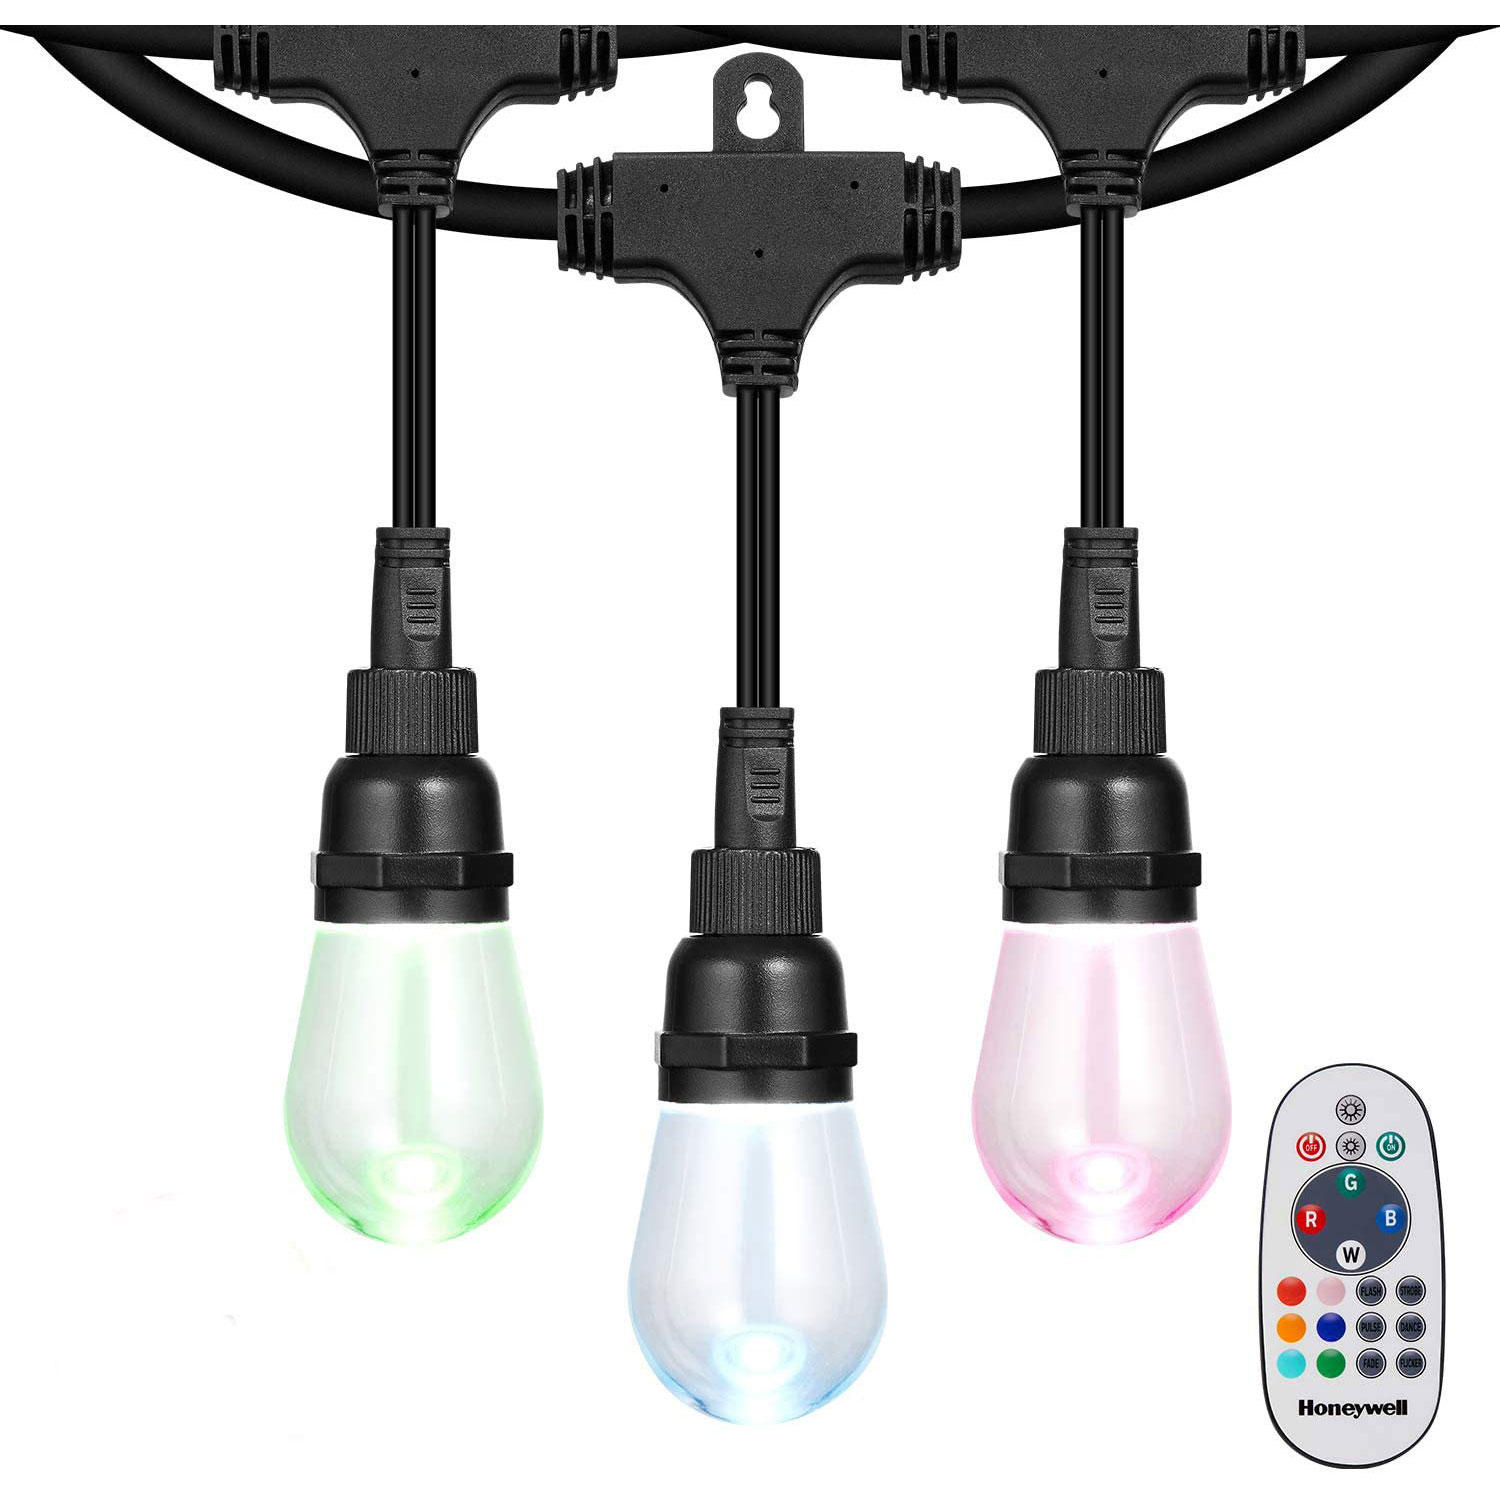 Honeywell 36' LED Color Changing String Light Set With Remote Control (ST136E216200)